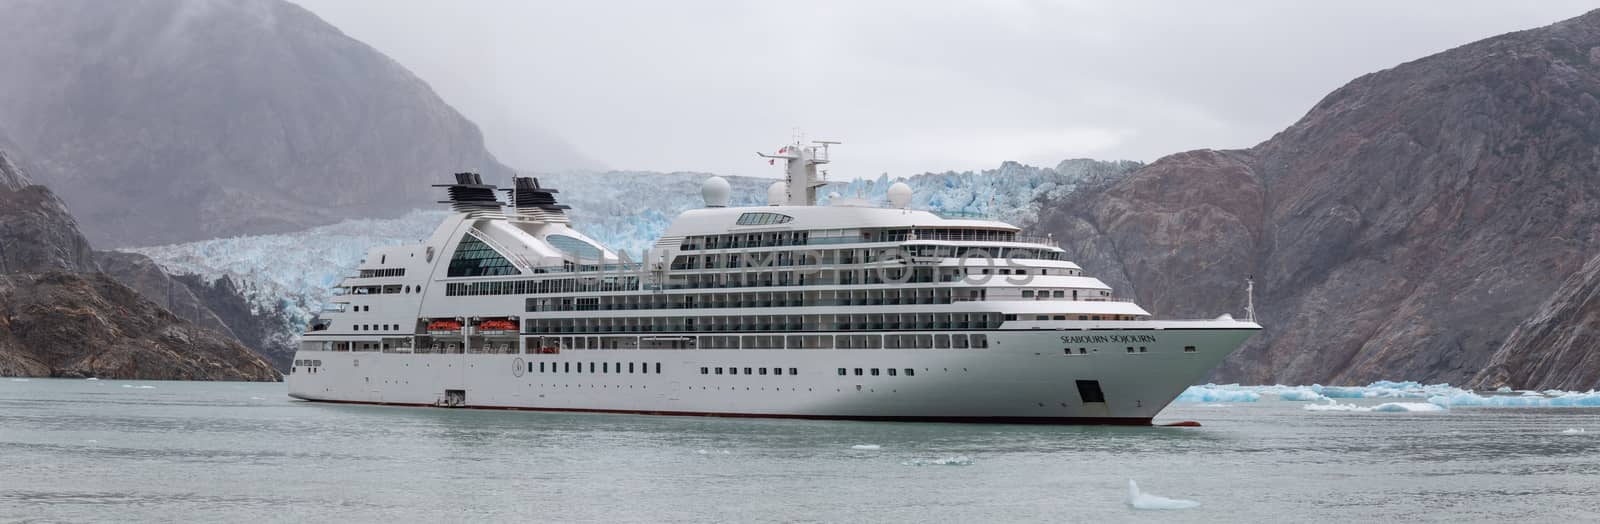 Tracy Arm Fjord, Alaska, USA - August 23, 2018: Panorama of Seabourn Sojourn cruise ship drifting with a massive glacier and mountains behind it